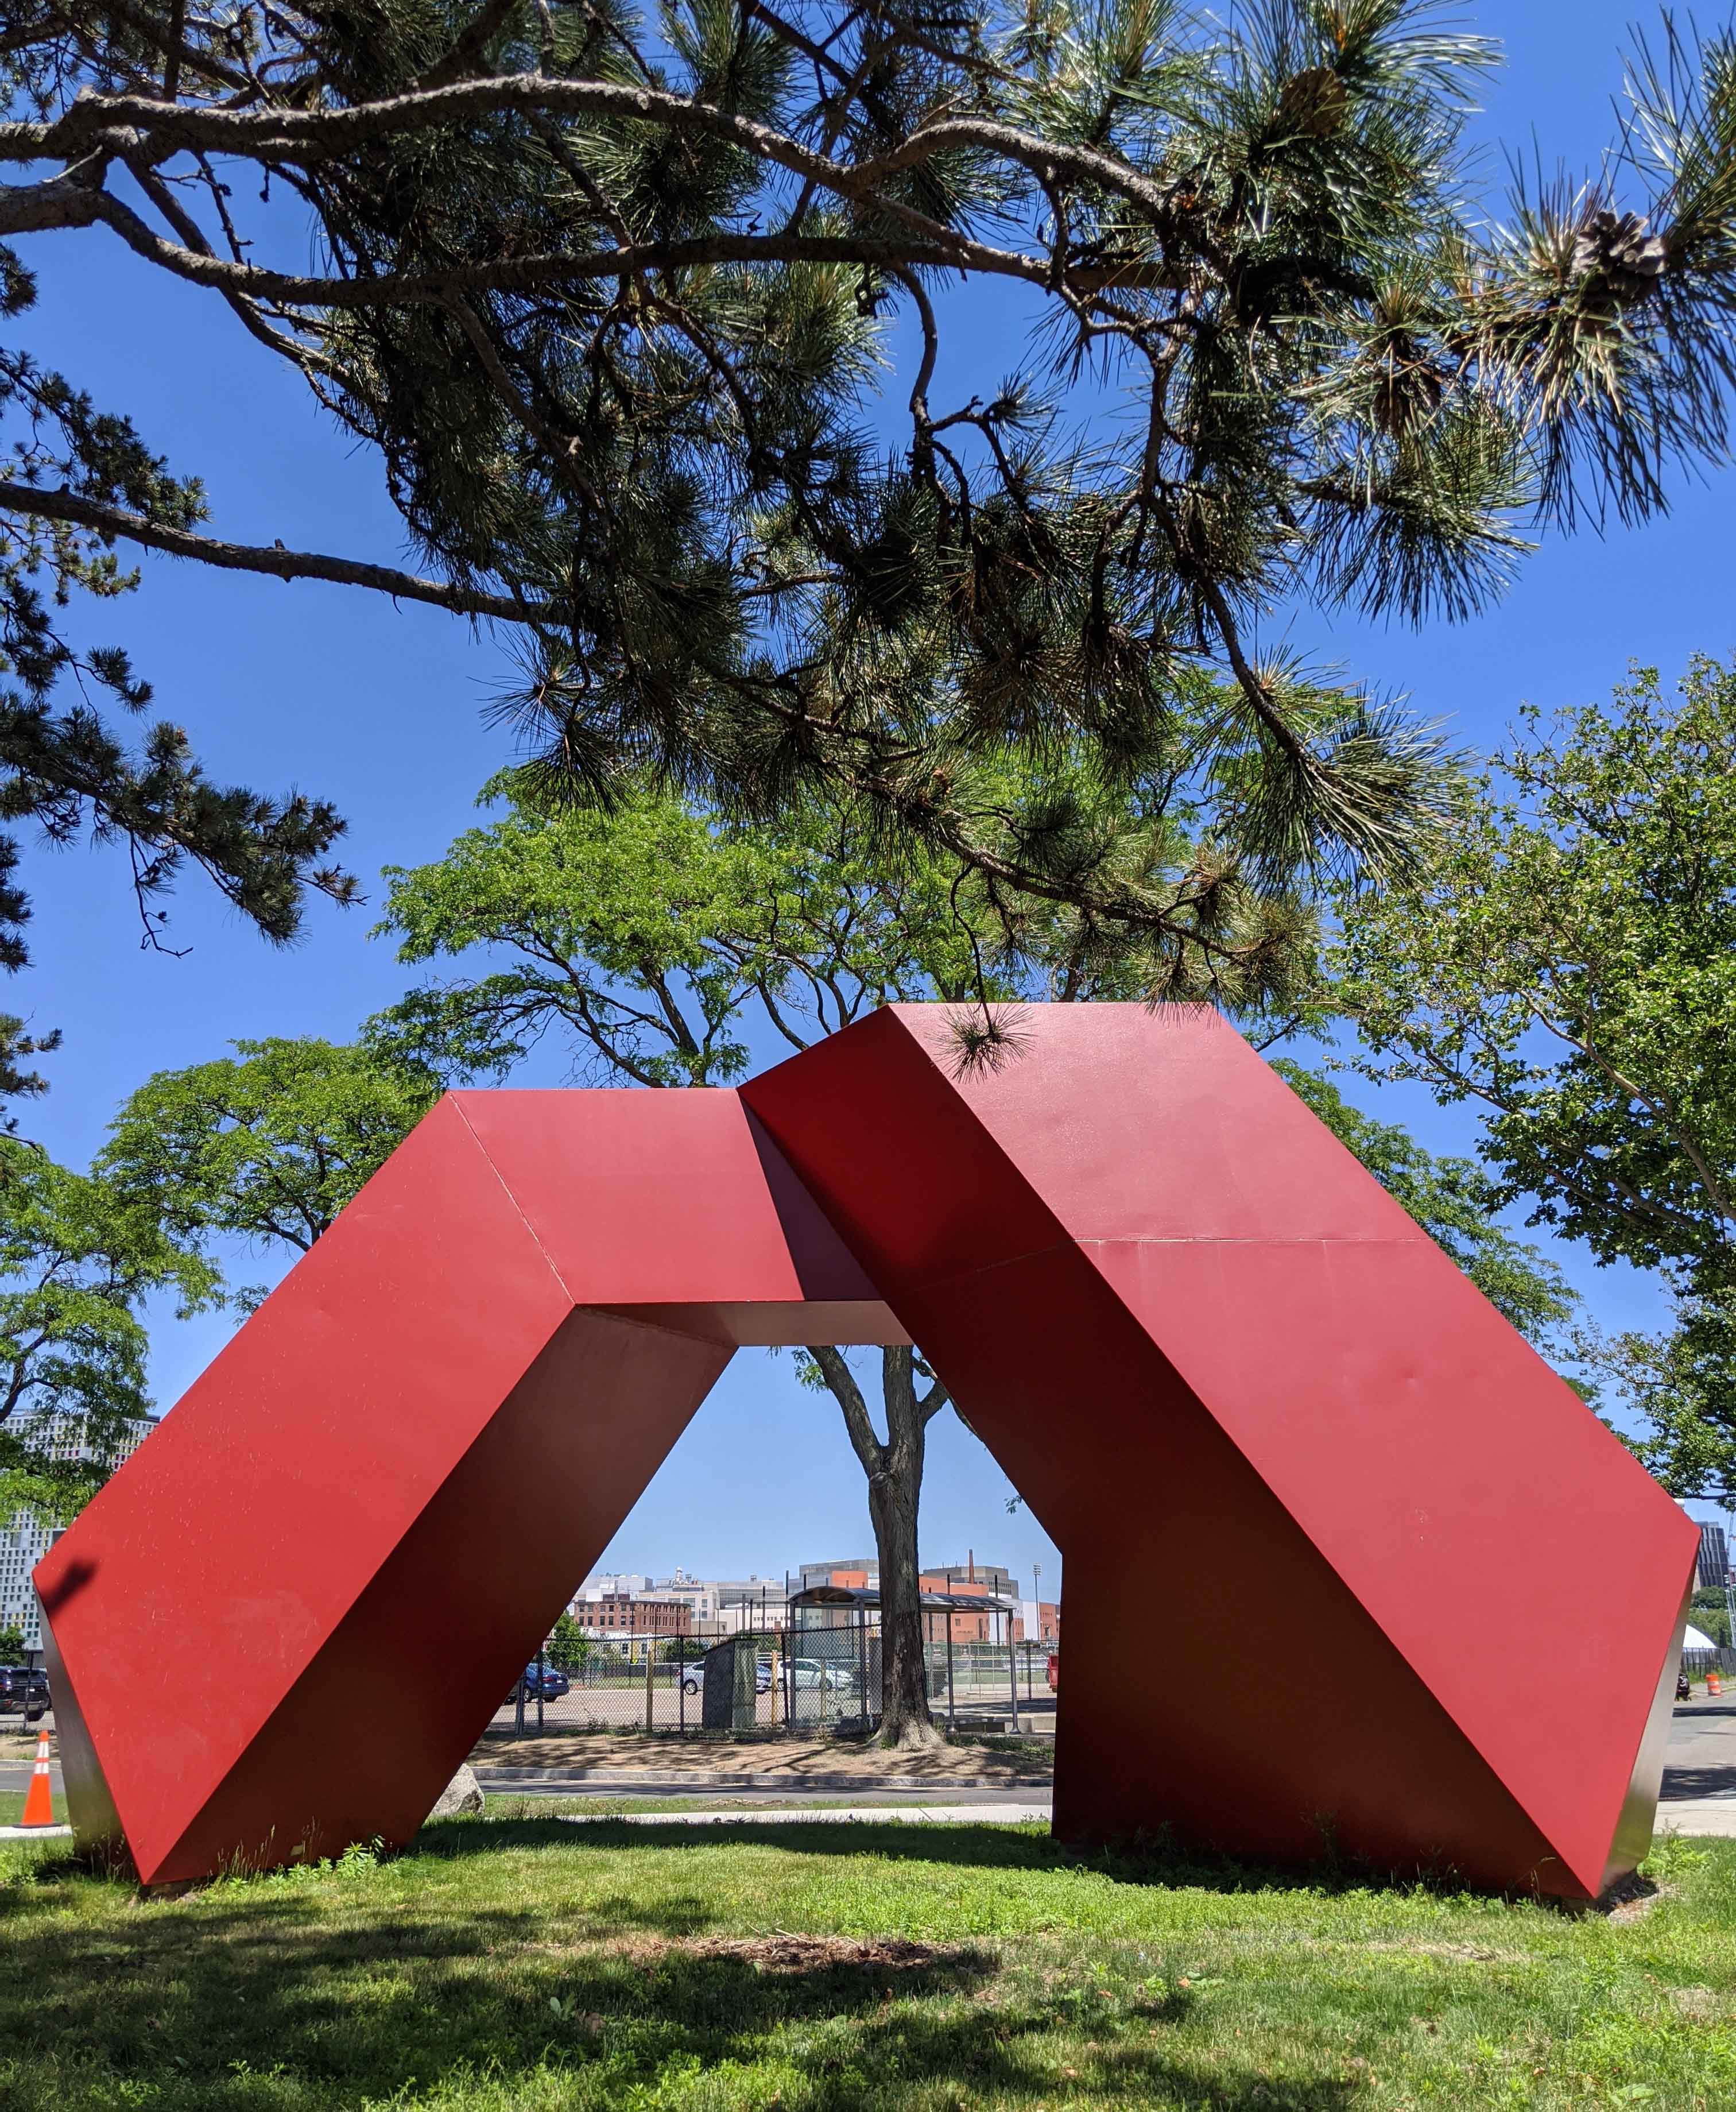 Tony Smith's 'For Marjorie' (1961) on the MIT campus seems to change shape and frame a sequence of landscapes as you walk around.